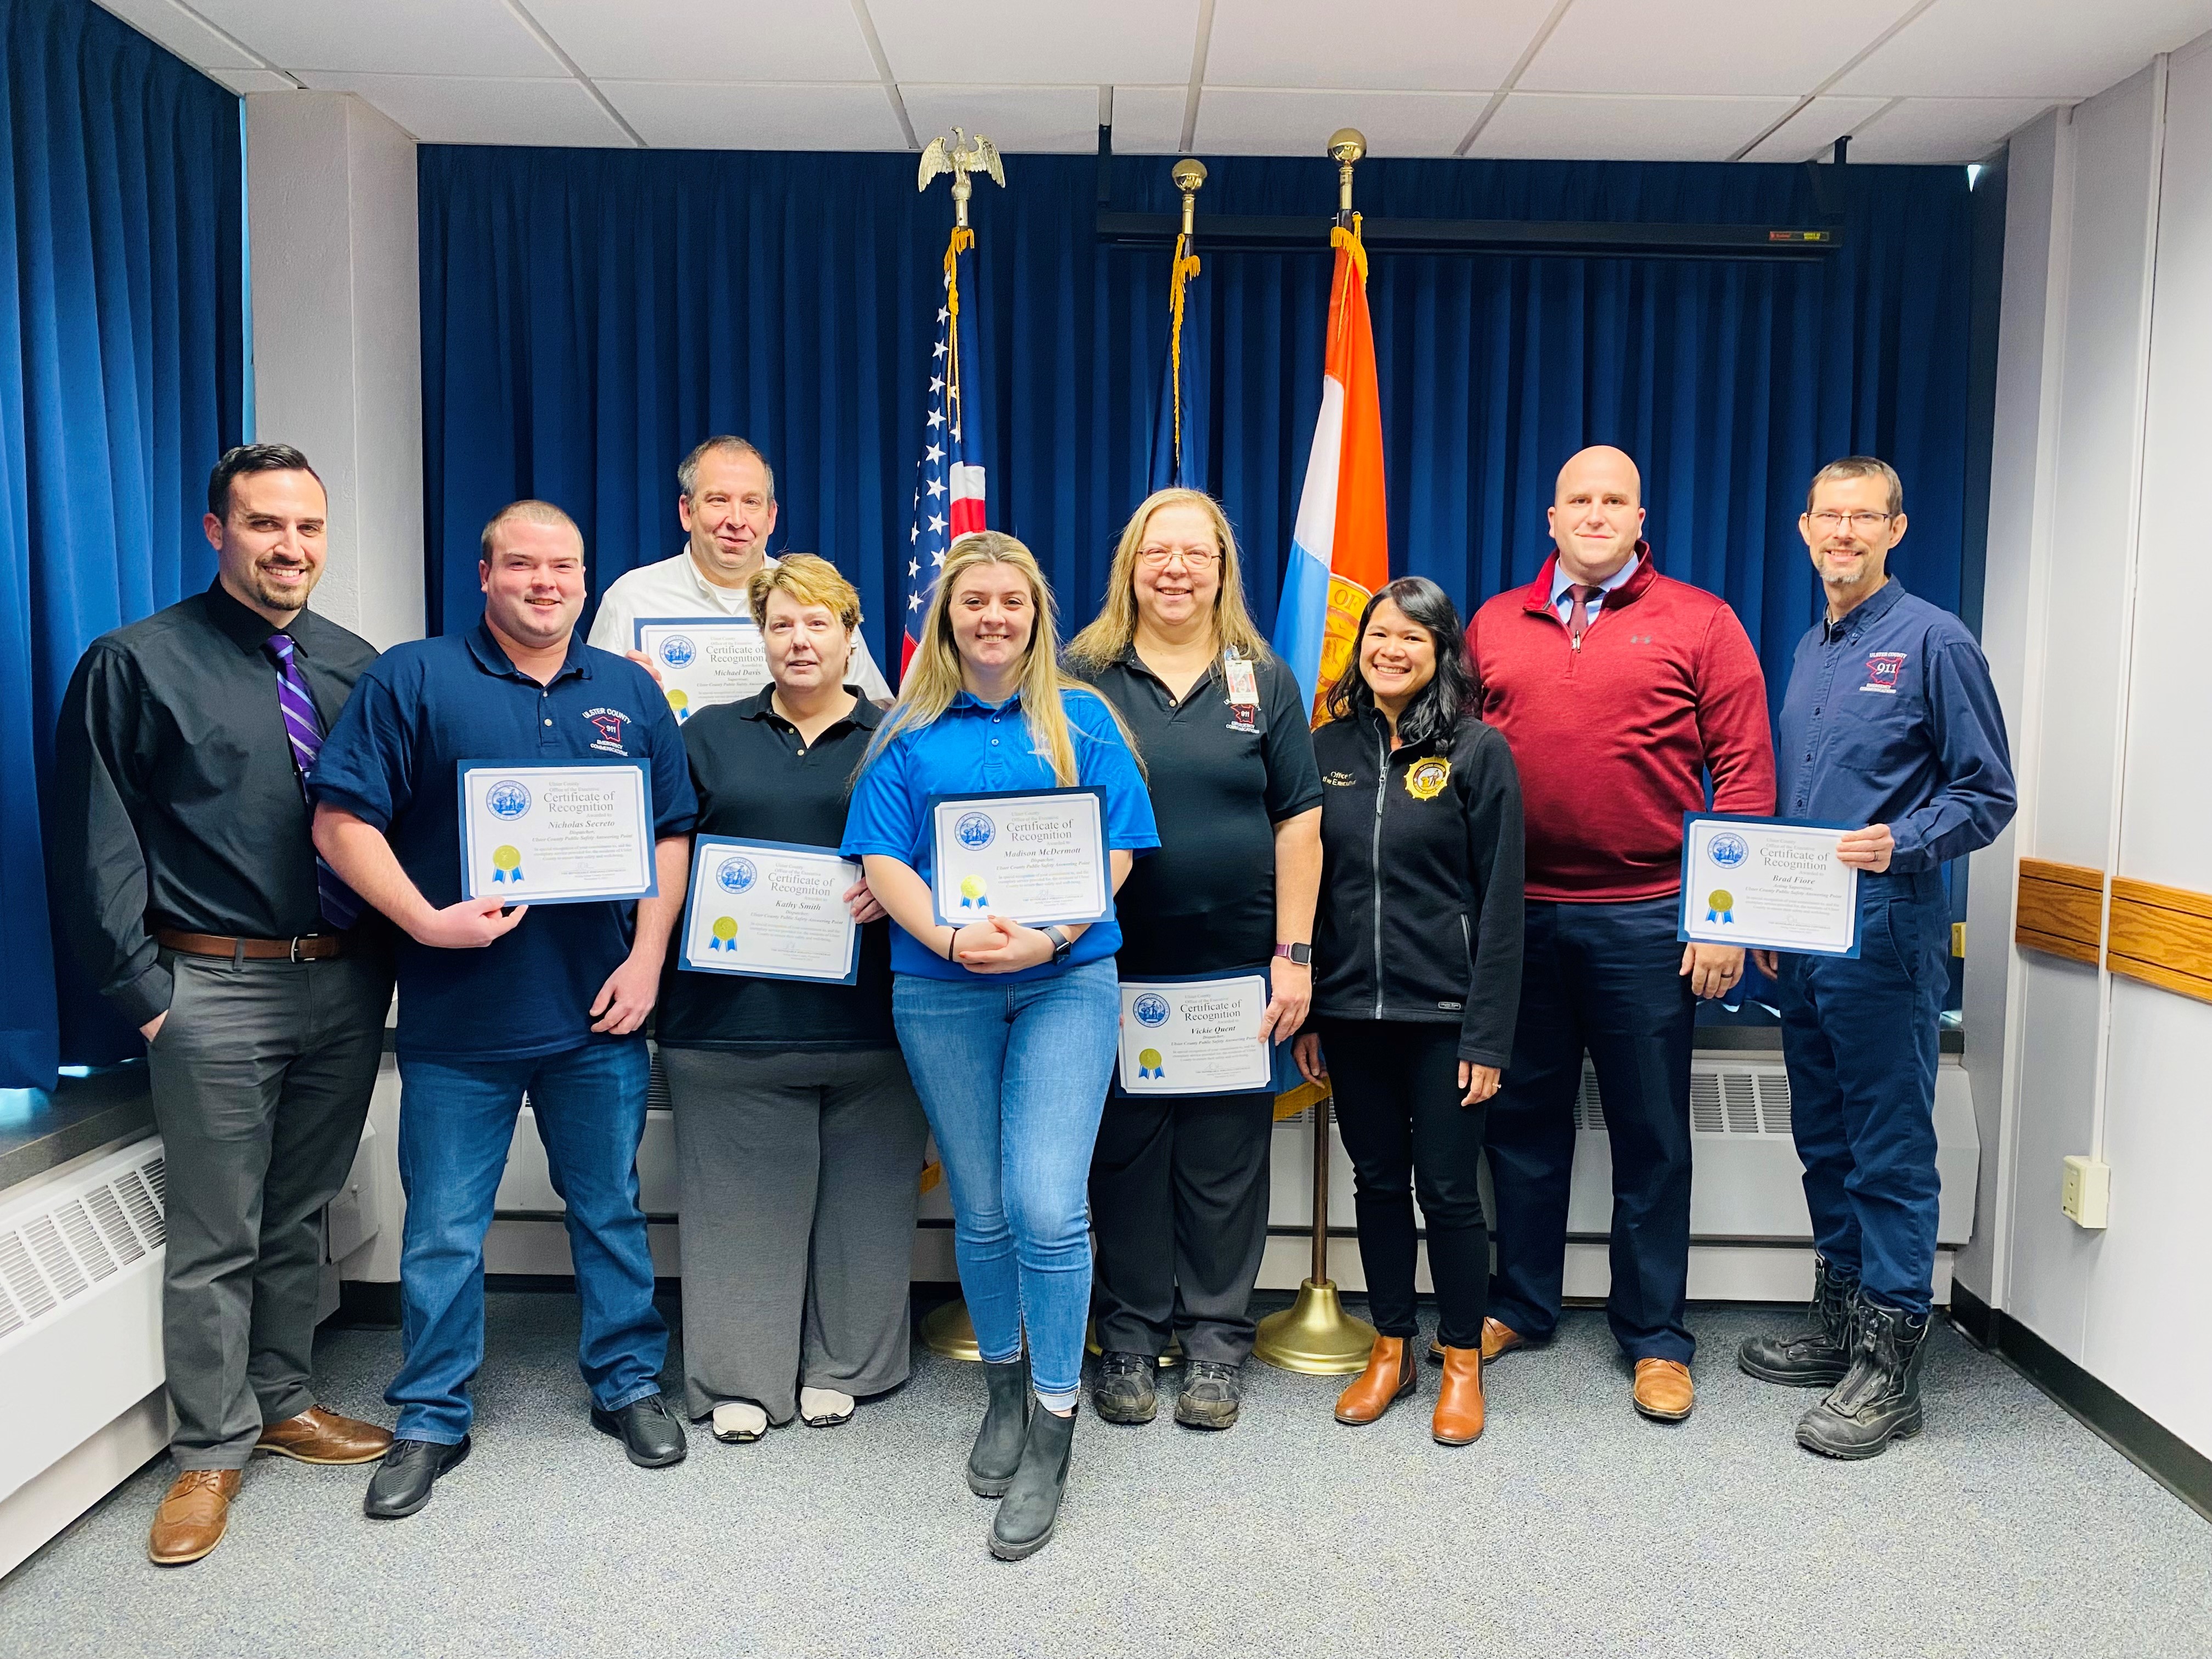 Photo caption (from left to right): Deputy Director of Emergency Communications Andrew Cafaldo, Dispatcher Nicholas Secreto, Supervisor Michael Davis, Dispatcher Kathy Smith, Dispatcher Madison McDermott, Dispatcher Vickie Quent, Acting Ulster County Executive Johanna Contreras, Director of Emergency Services Everett Erichsen and Acting Supervisor Brad Fiore